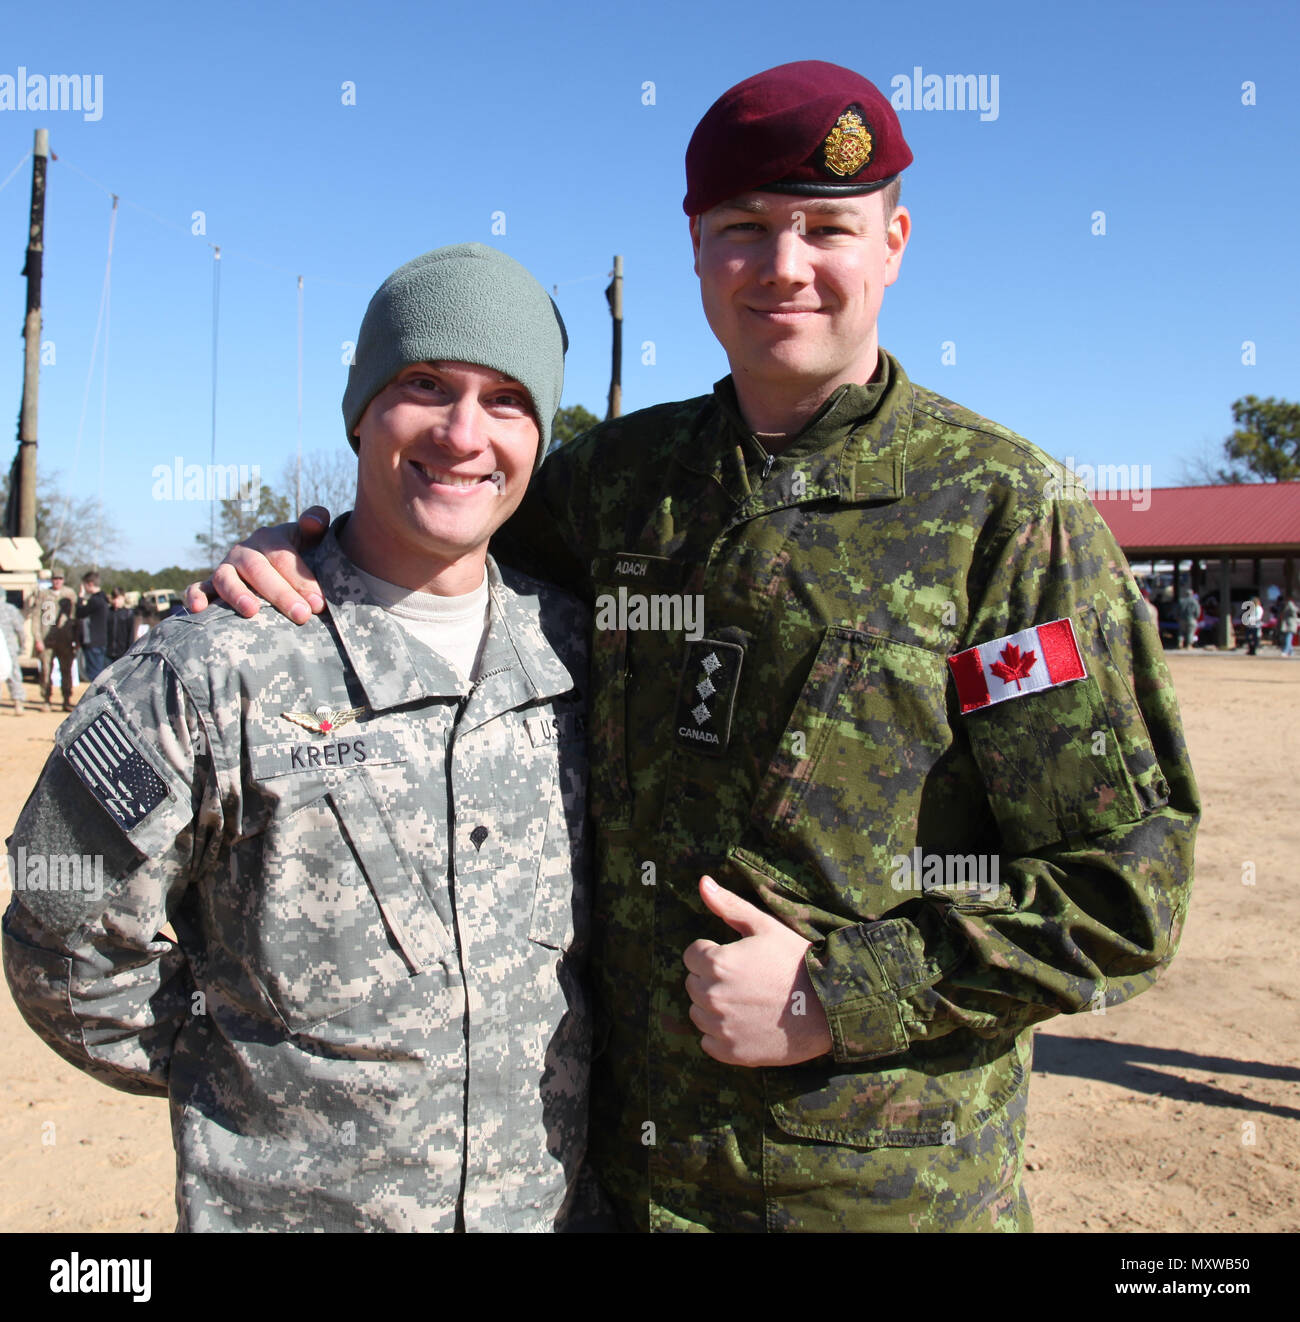 Spc. Matthew G. Kreps, 118th Military Police Company, 503d Military Police  Battalion (Airborne), 16th Military Police Brigade, XVII Airborne Corps  (Airborne) receiving his Canadian jump wings during Operation Toy Drop XIX.  This